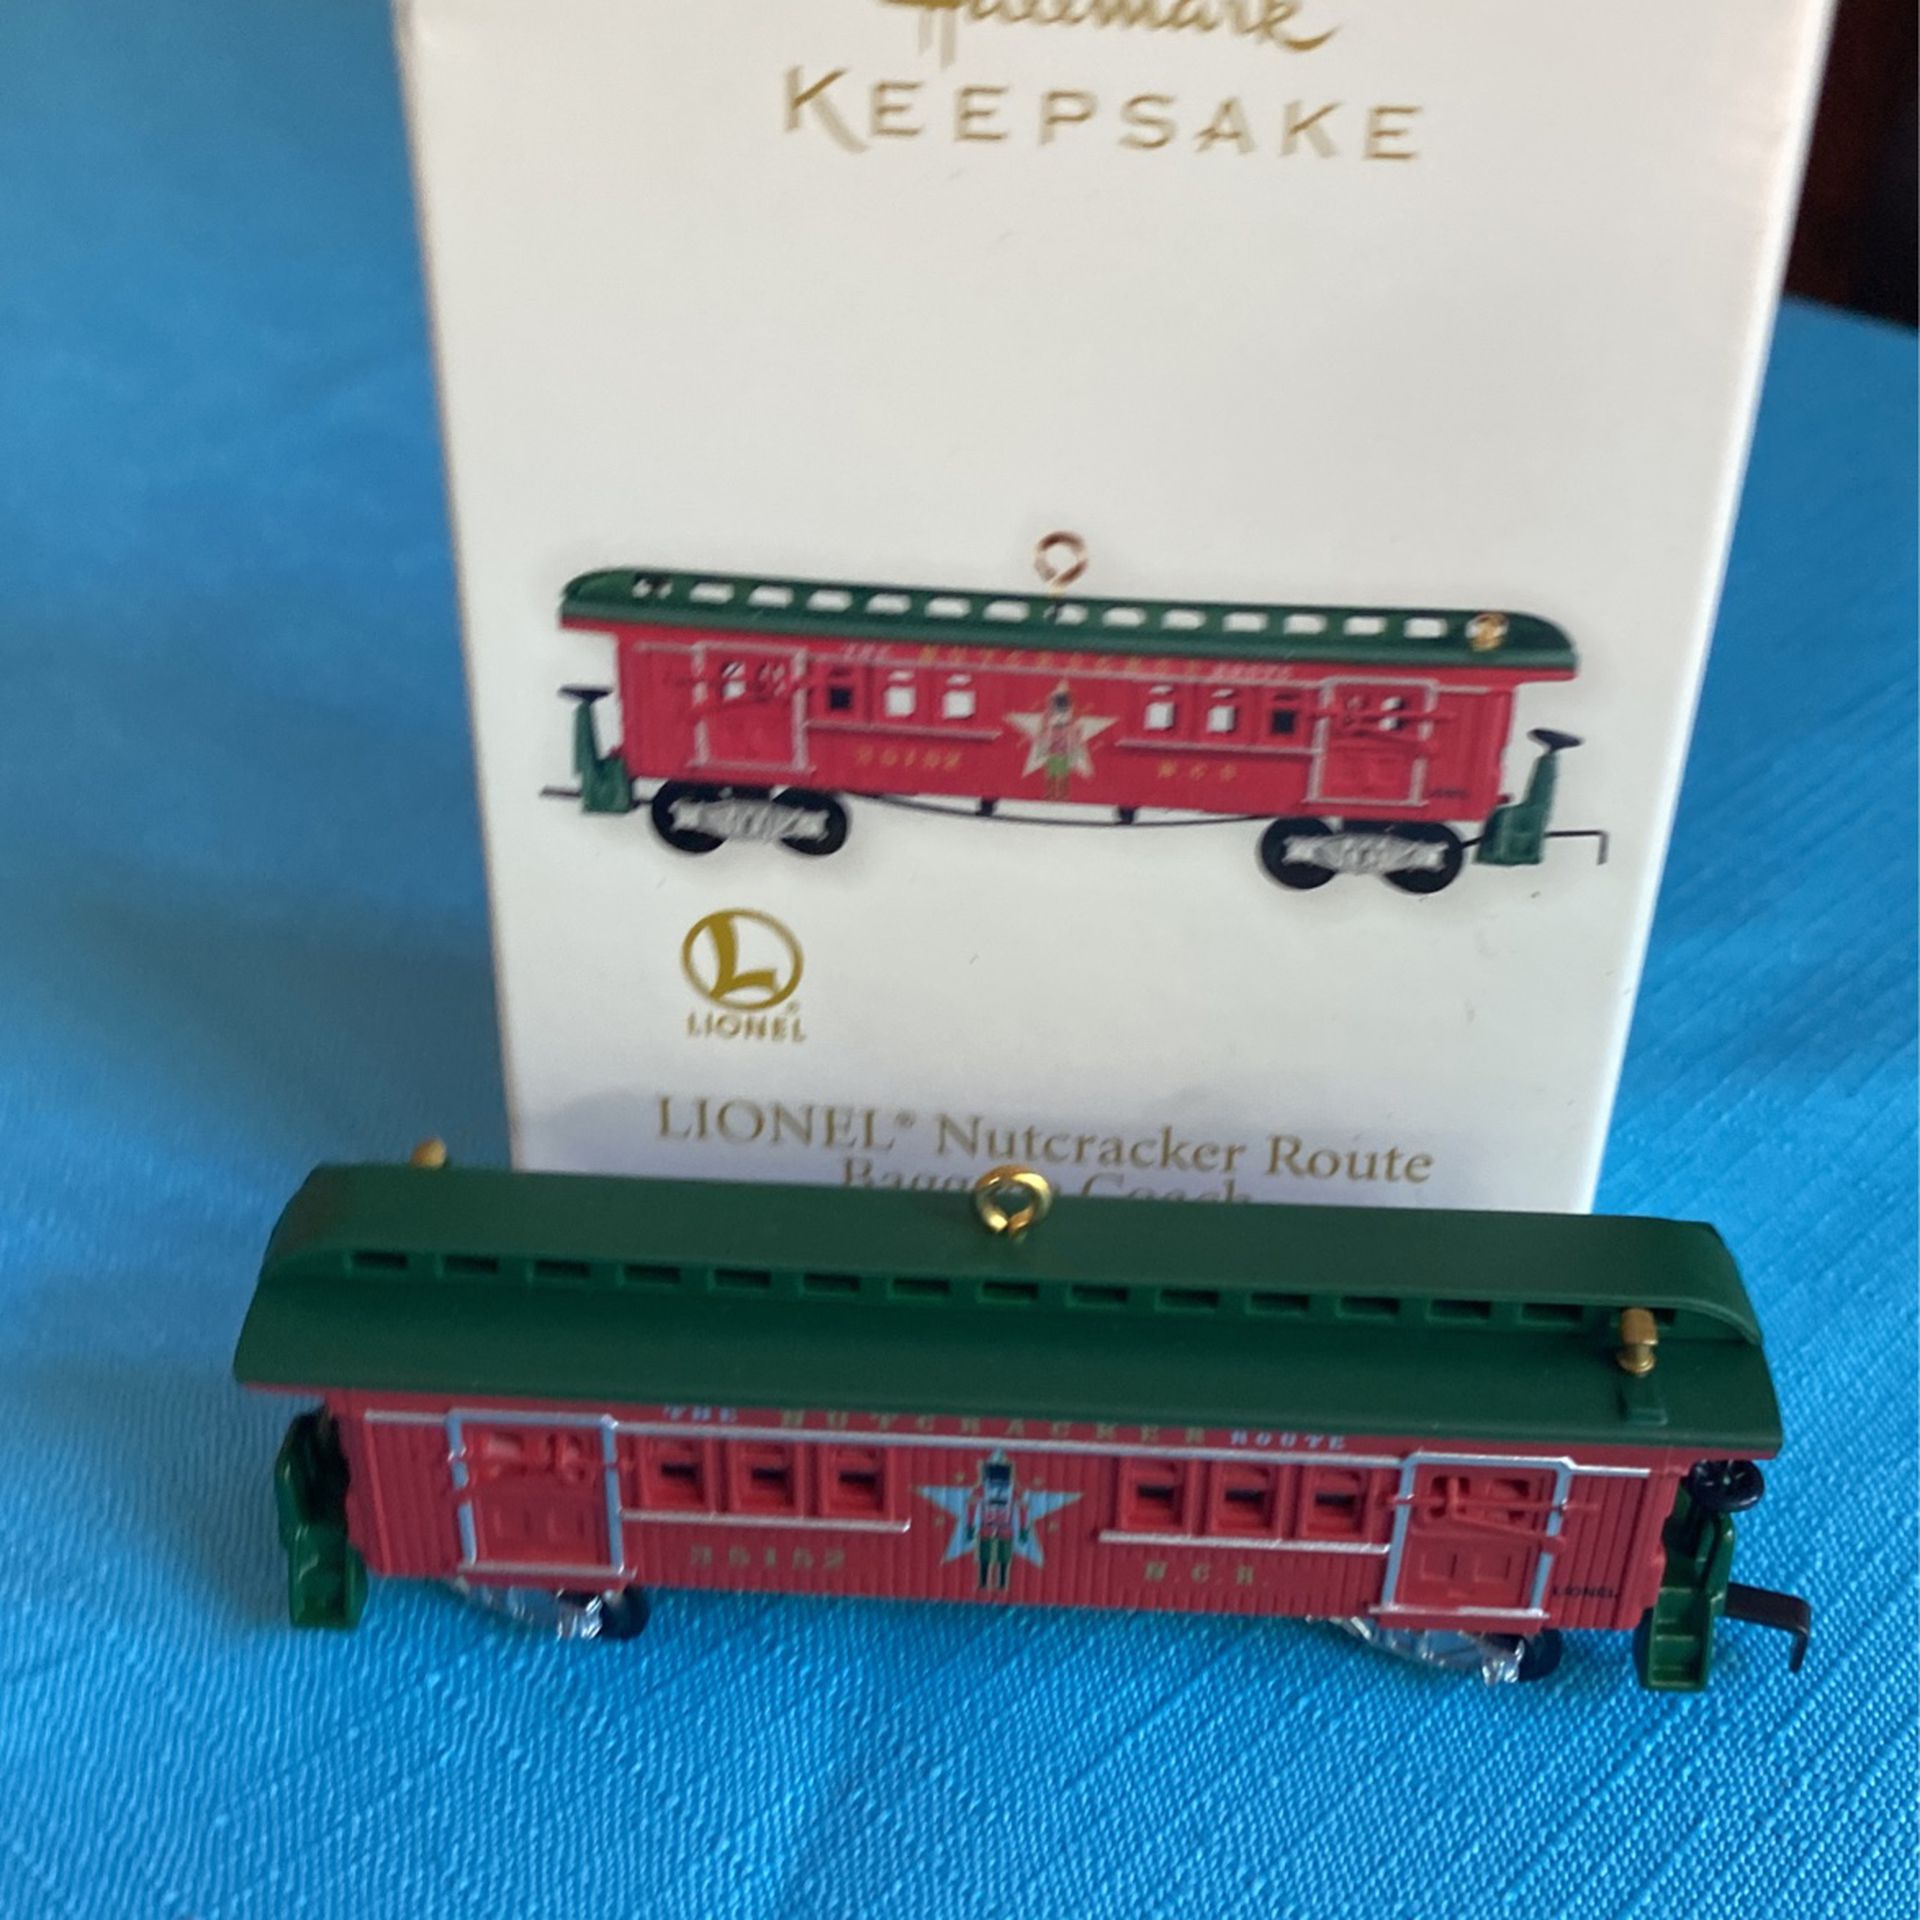 Hallmark keepsake Lynell nutcracker route baggage coach collectible Christmas tree ornament hand crafted, metal, 2012 in original box